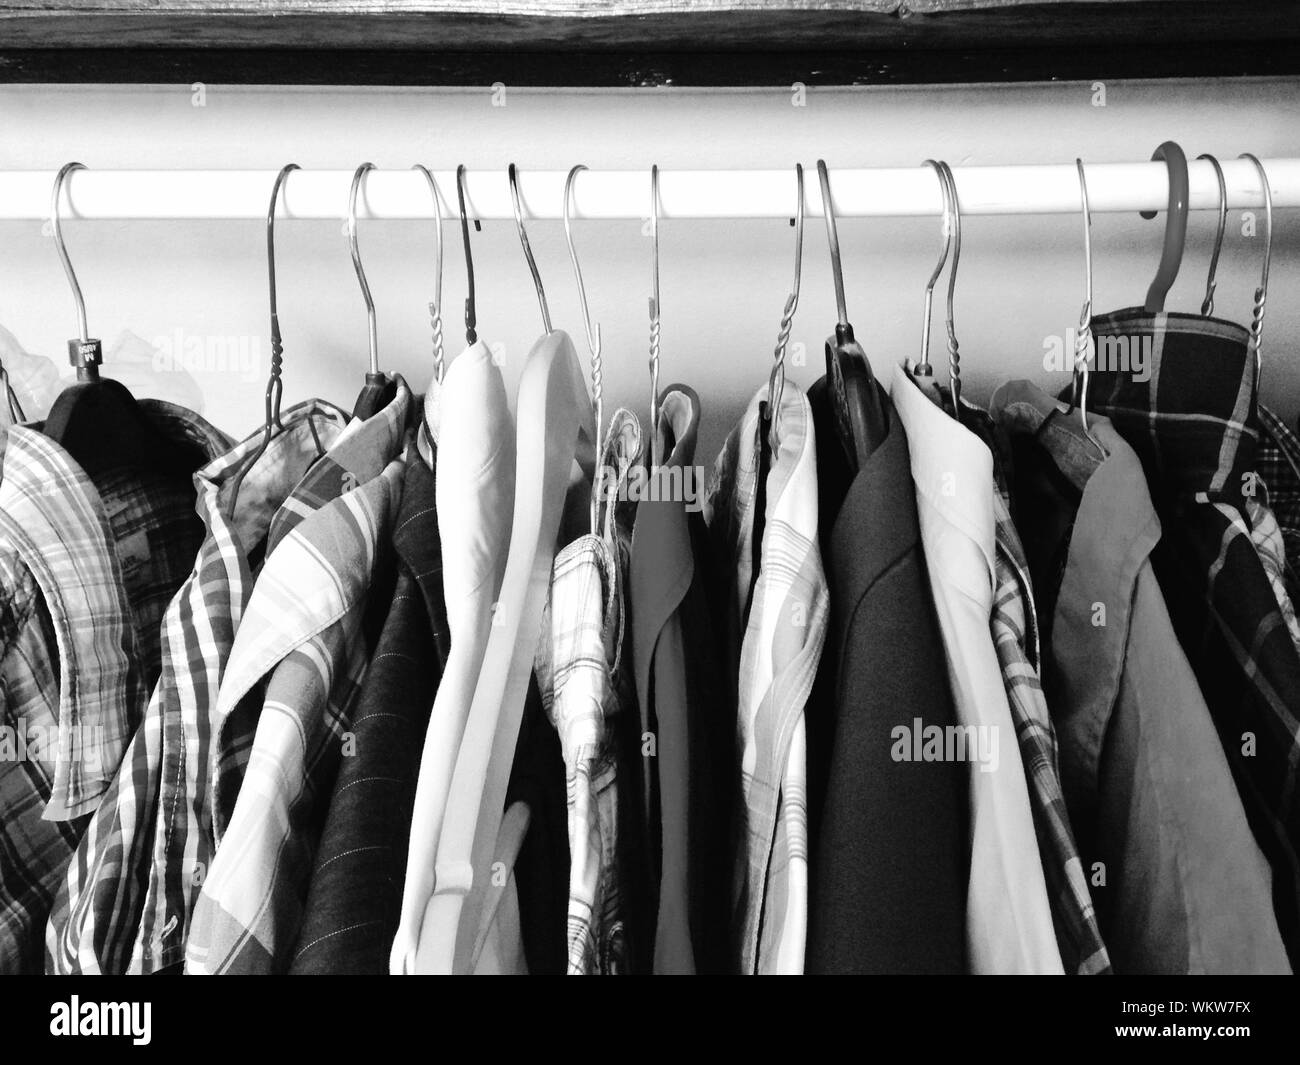 Menswear Clothes Hanging On Rack In Closet Stock Photo